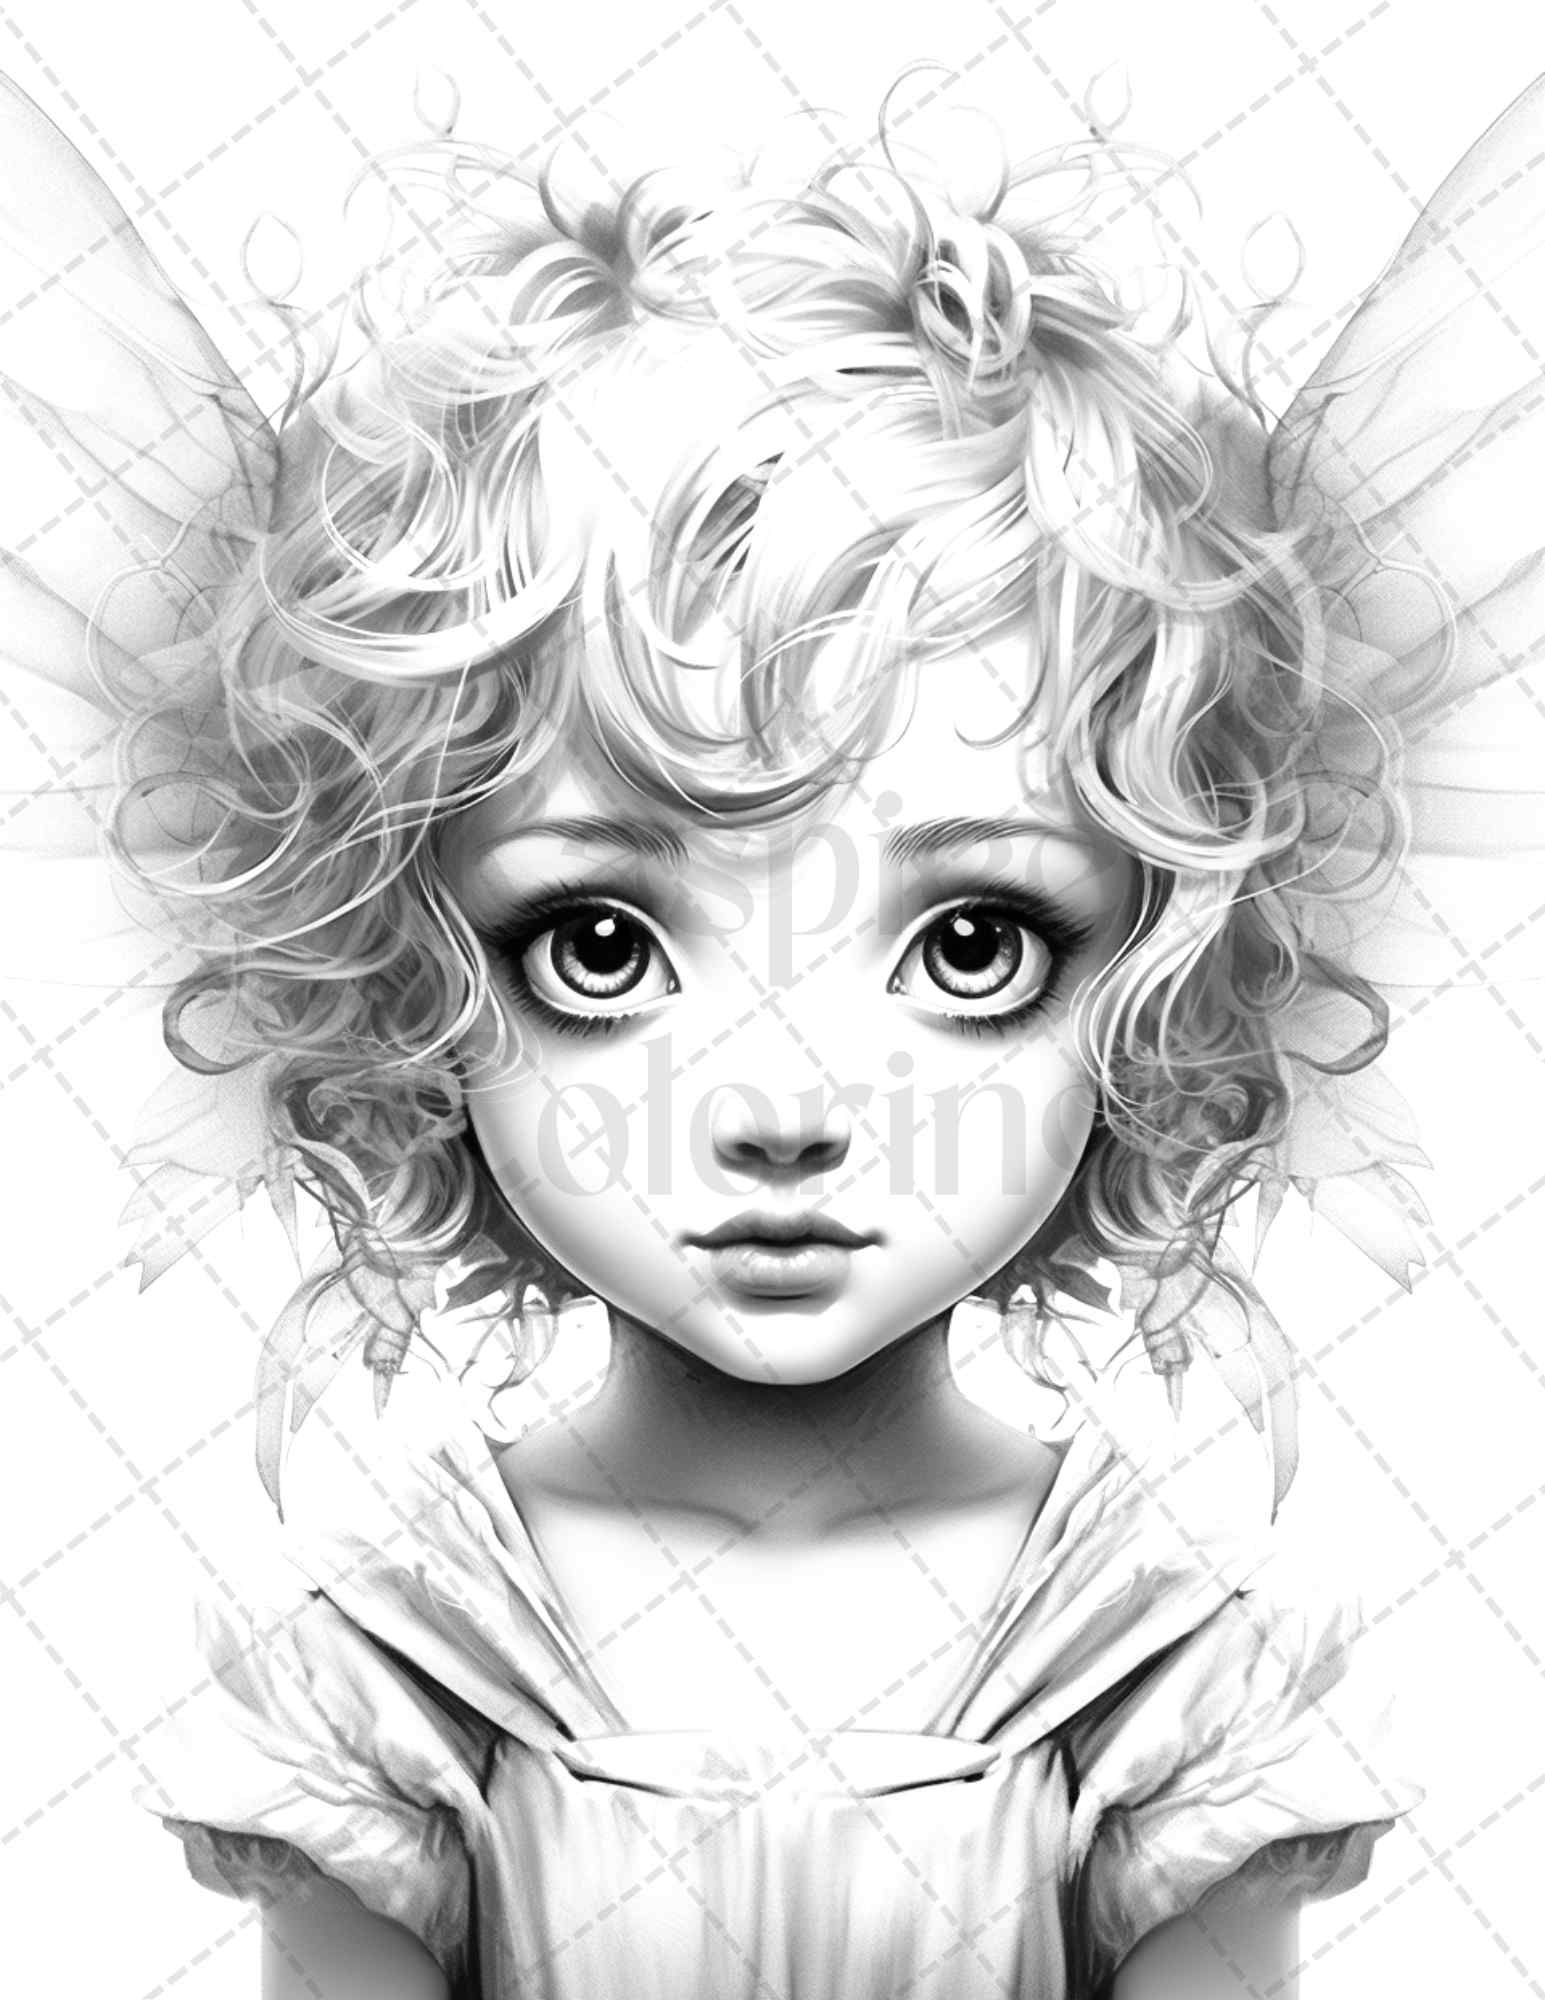 45 Adorable Chibi Fairy Grayscale Coloring Pages Printable for Adults, PDF File Instant Download - raspiee